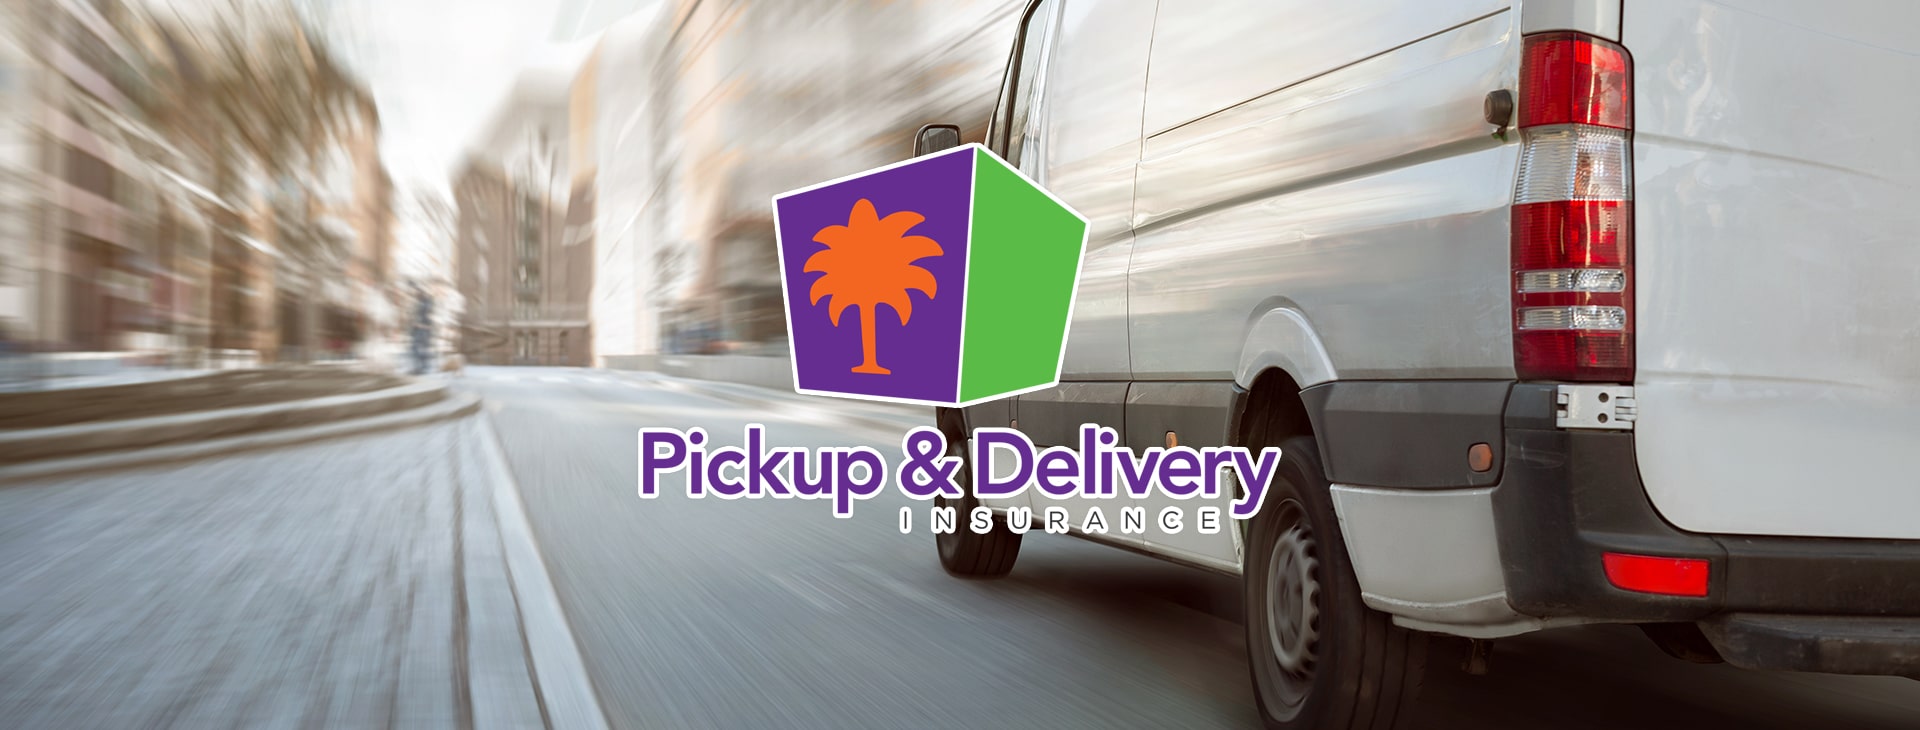 pickup and delivery insurance slide 3